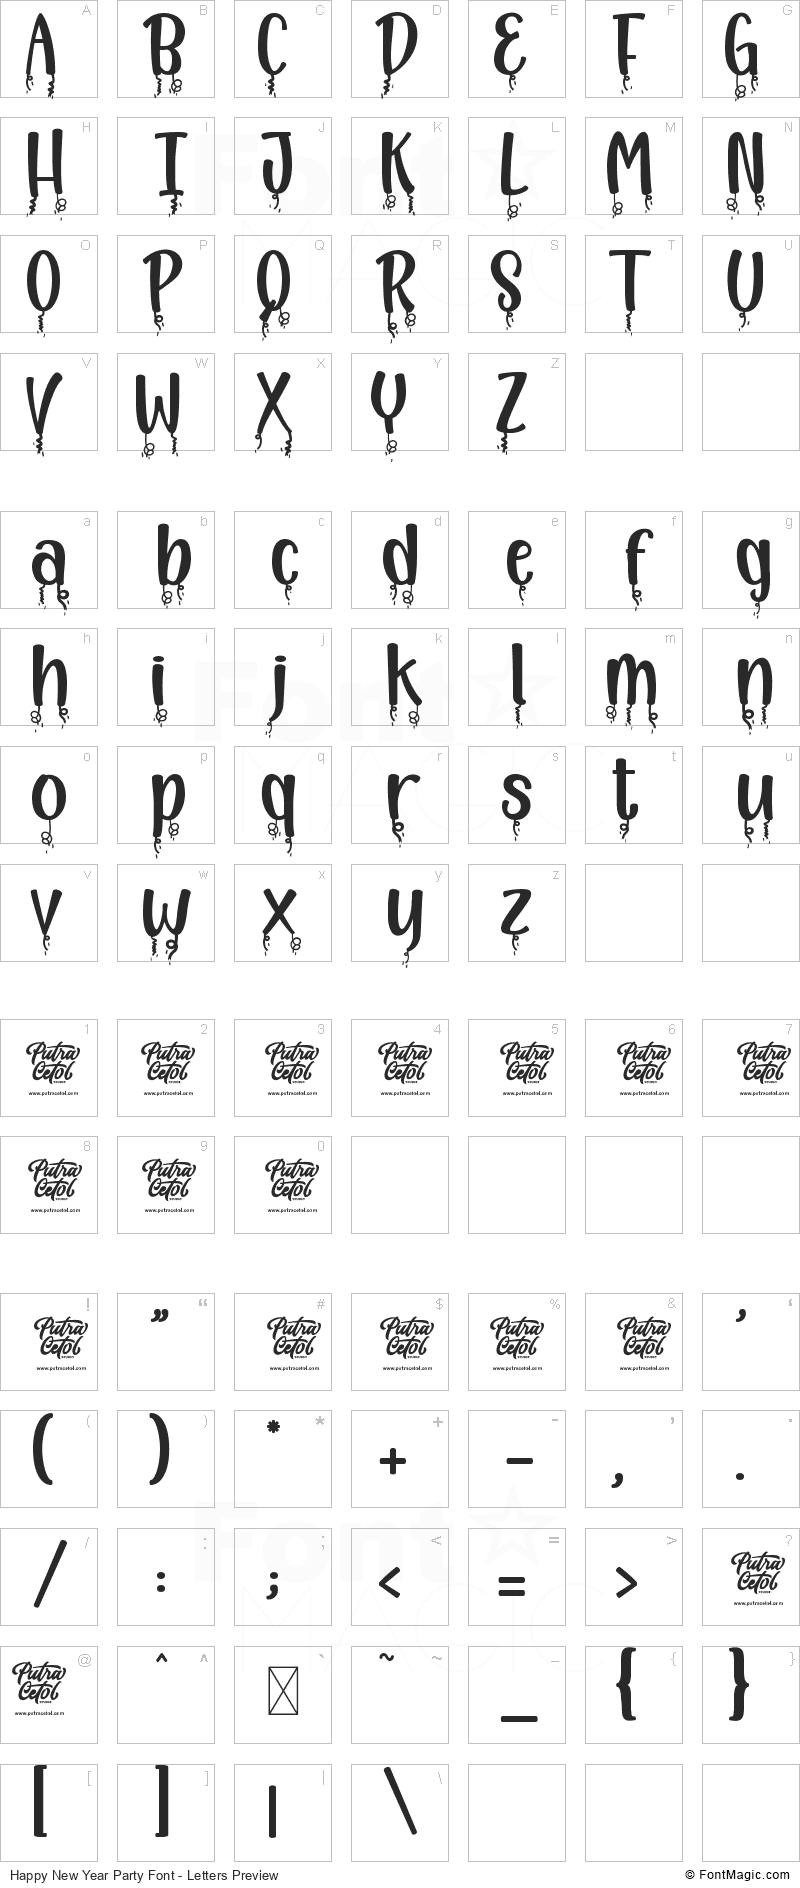 Happy New Year Party Font - All Latters Preview Chart